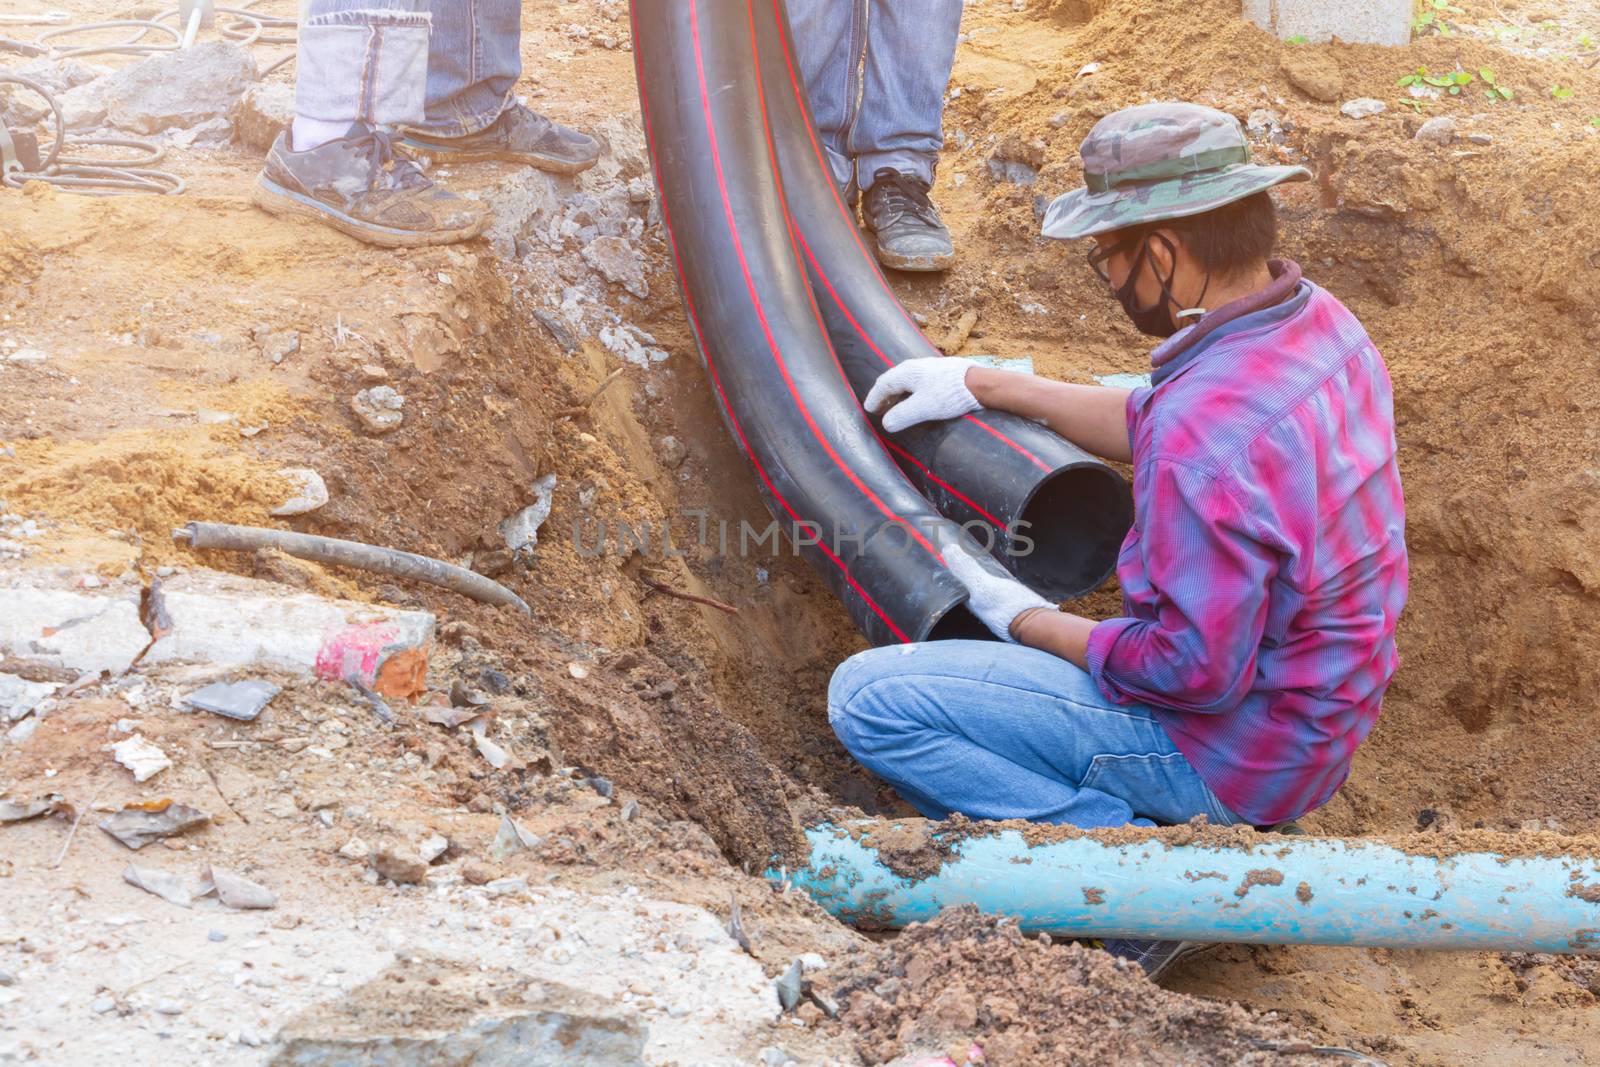 repair water pipes black and worker On the ground by pramot